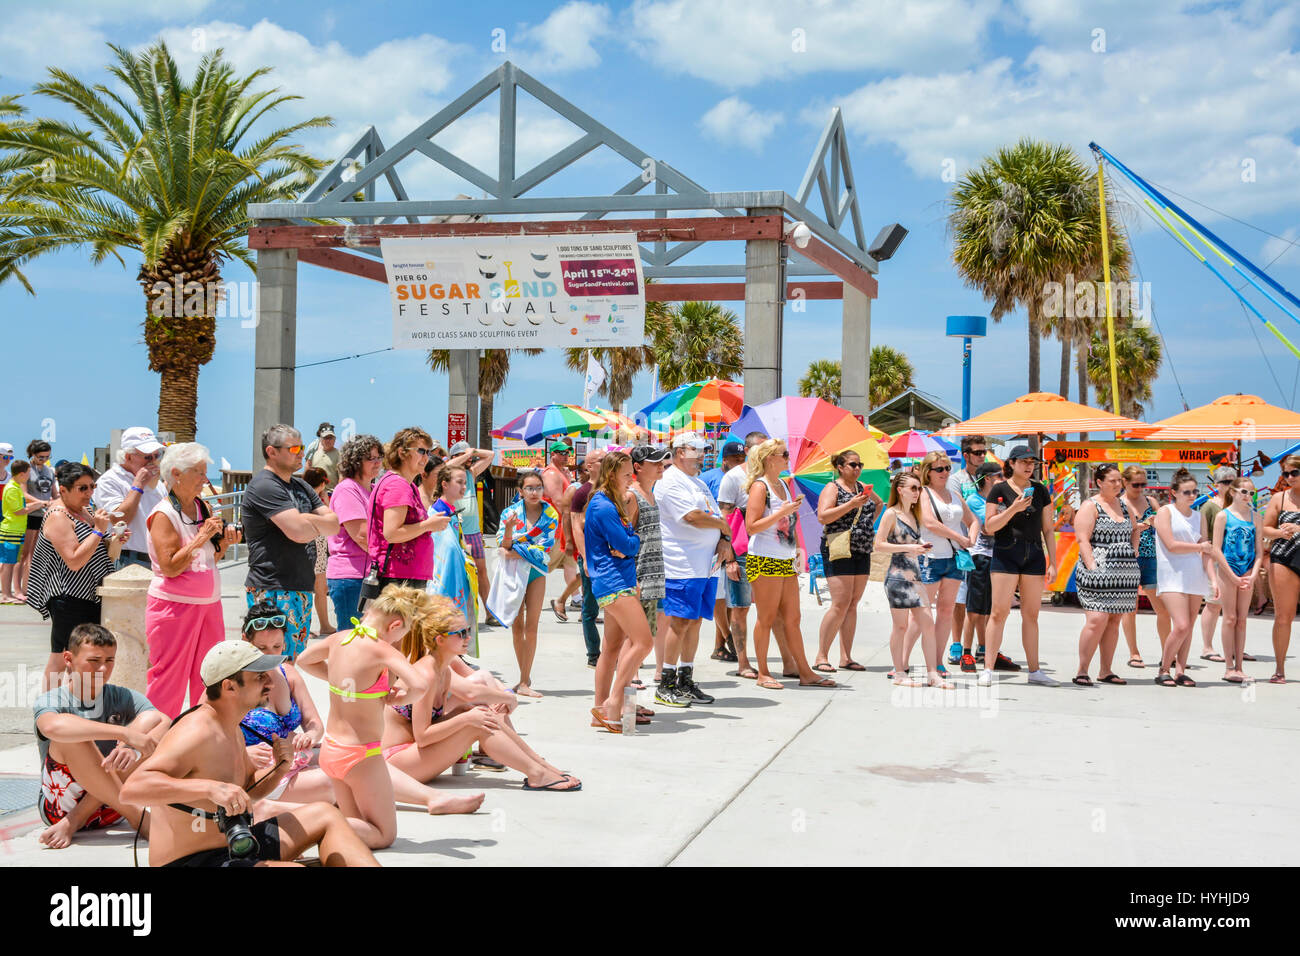 Crowds gather around the entrance to Pier 60 in Clearwater Beach